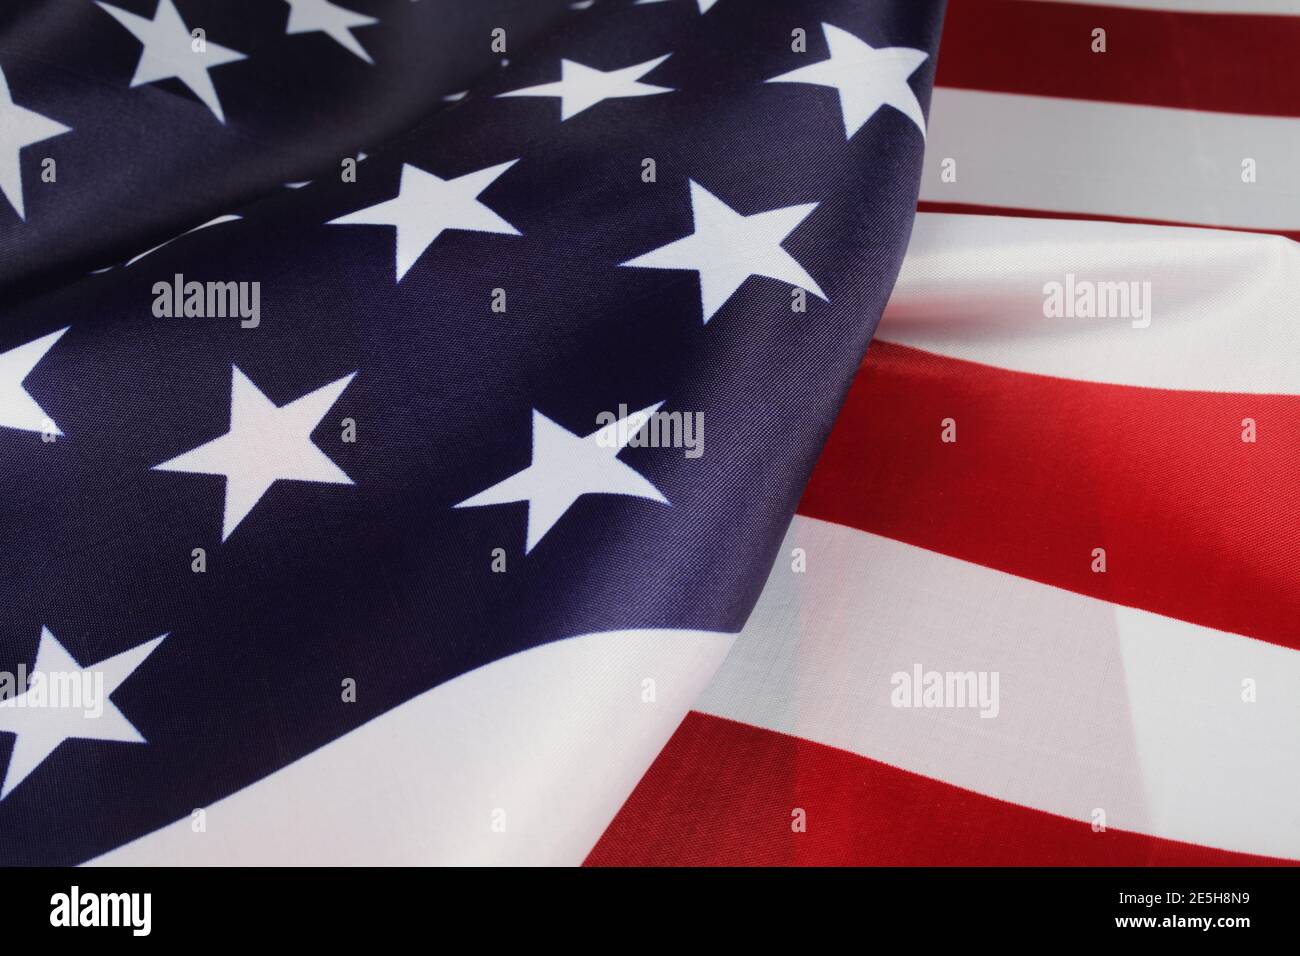 US state flag close-up, background. Stock Photo